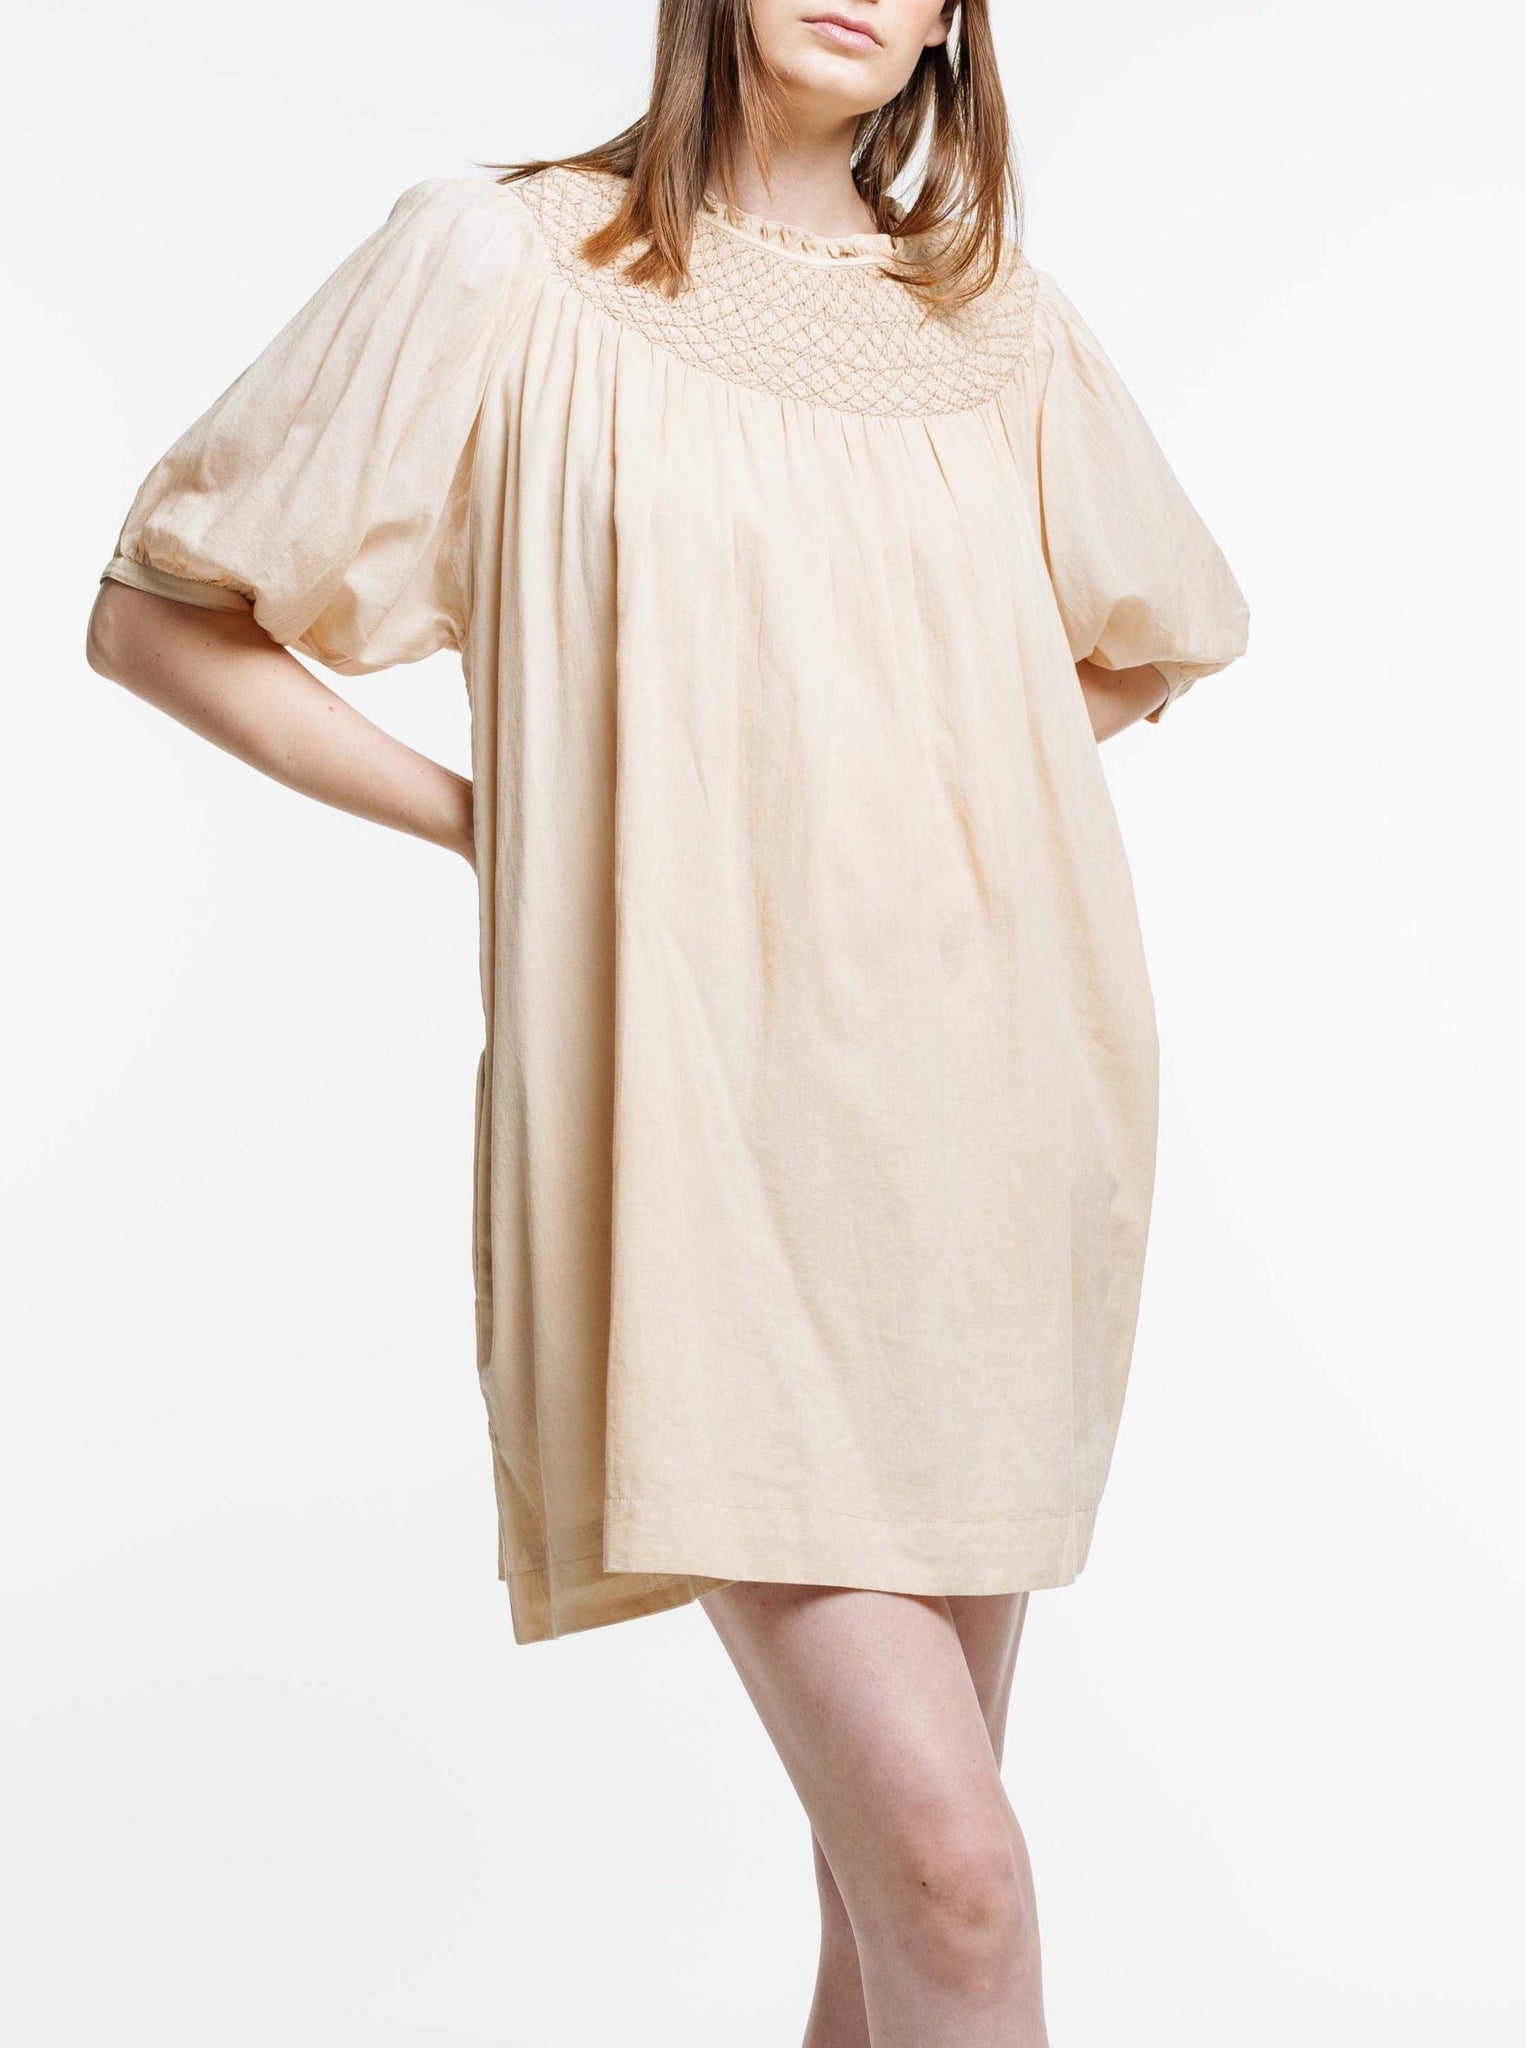 The model is wearing a Mirabel Mini Dress - Acacia Wood with a ruffled sleeve.